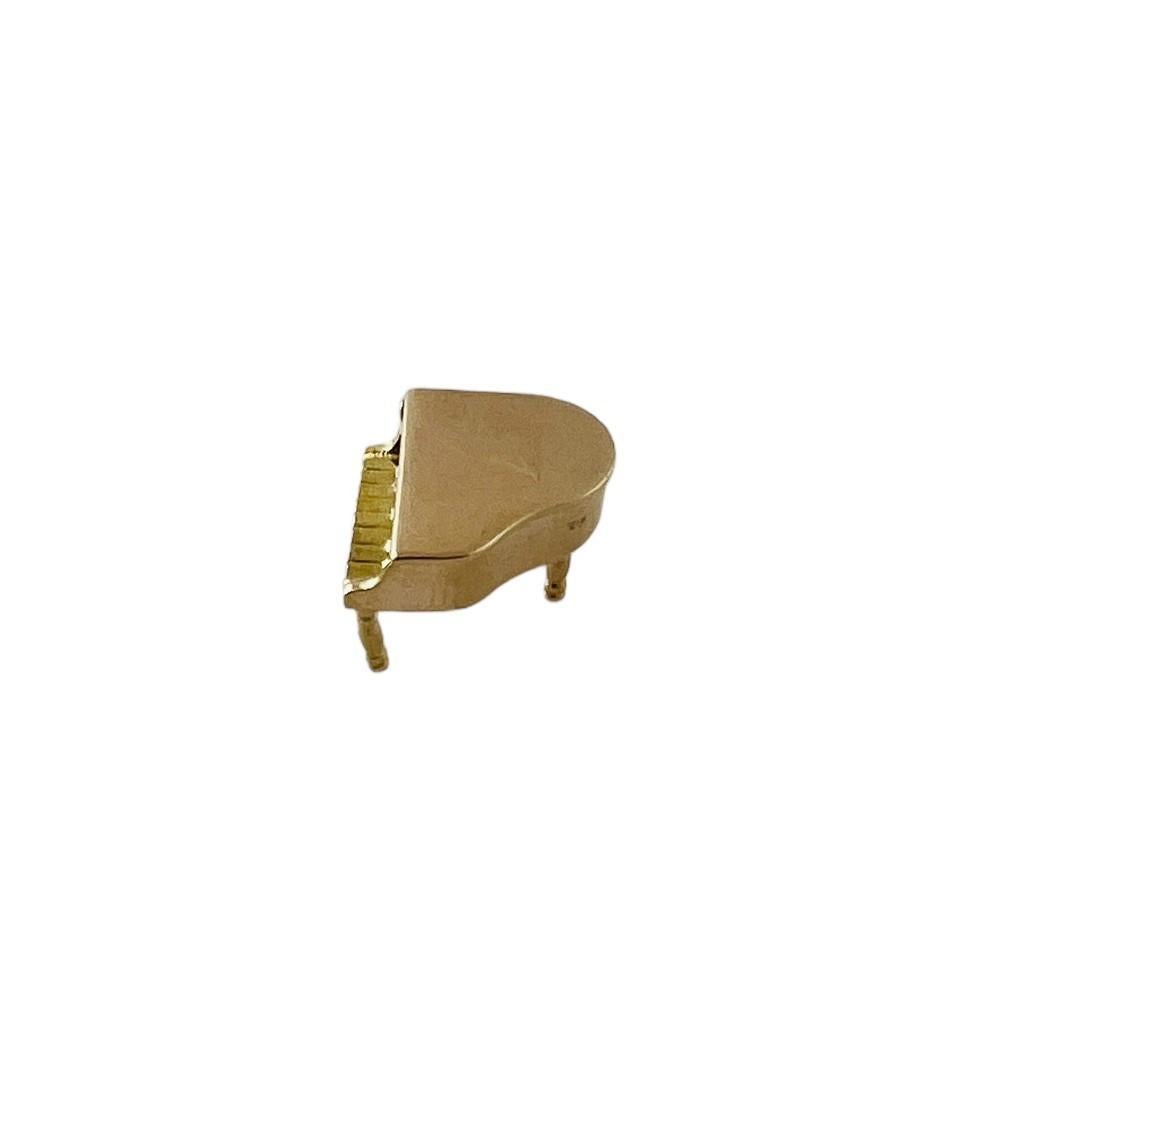 14K Yellow Gold Baby Grand Piano Charm Pendant #15613 In Good Condition For Sale In Washington Depot, CT